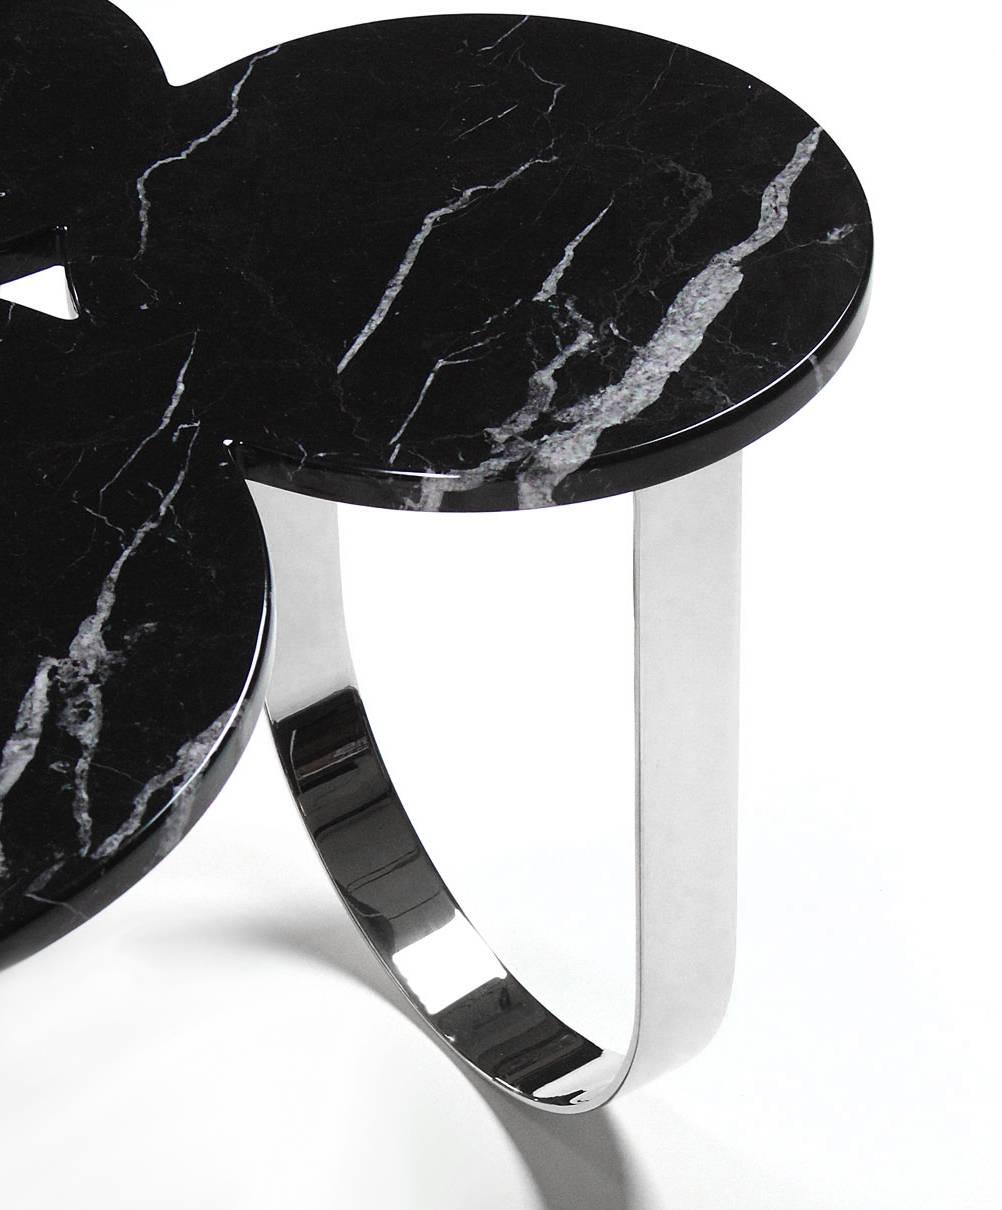 Side or End Table Black Marquinia Marble Mirror Brass Gold Collectible Design Neuf - En vente à Ancona, Marche